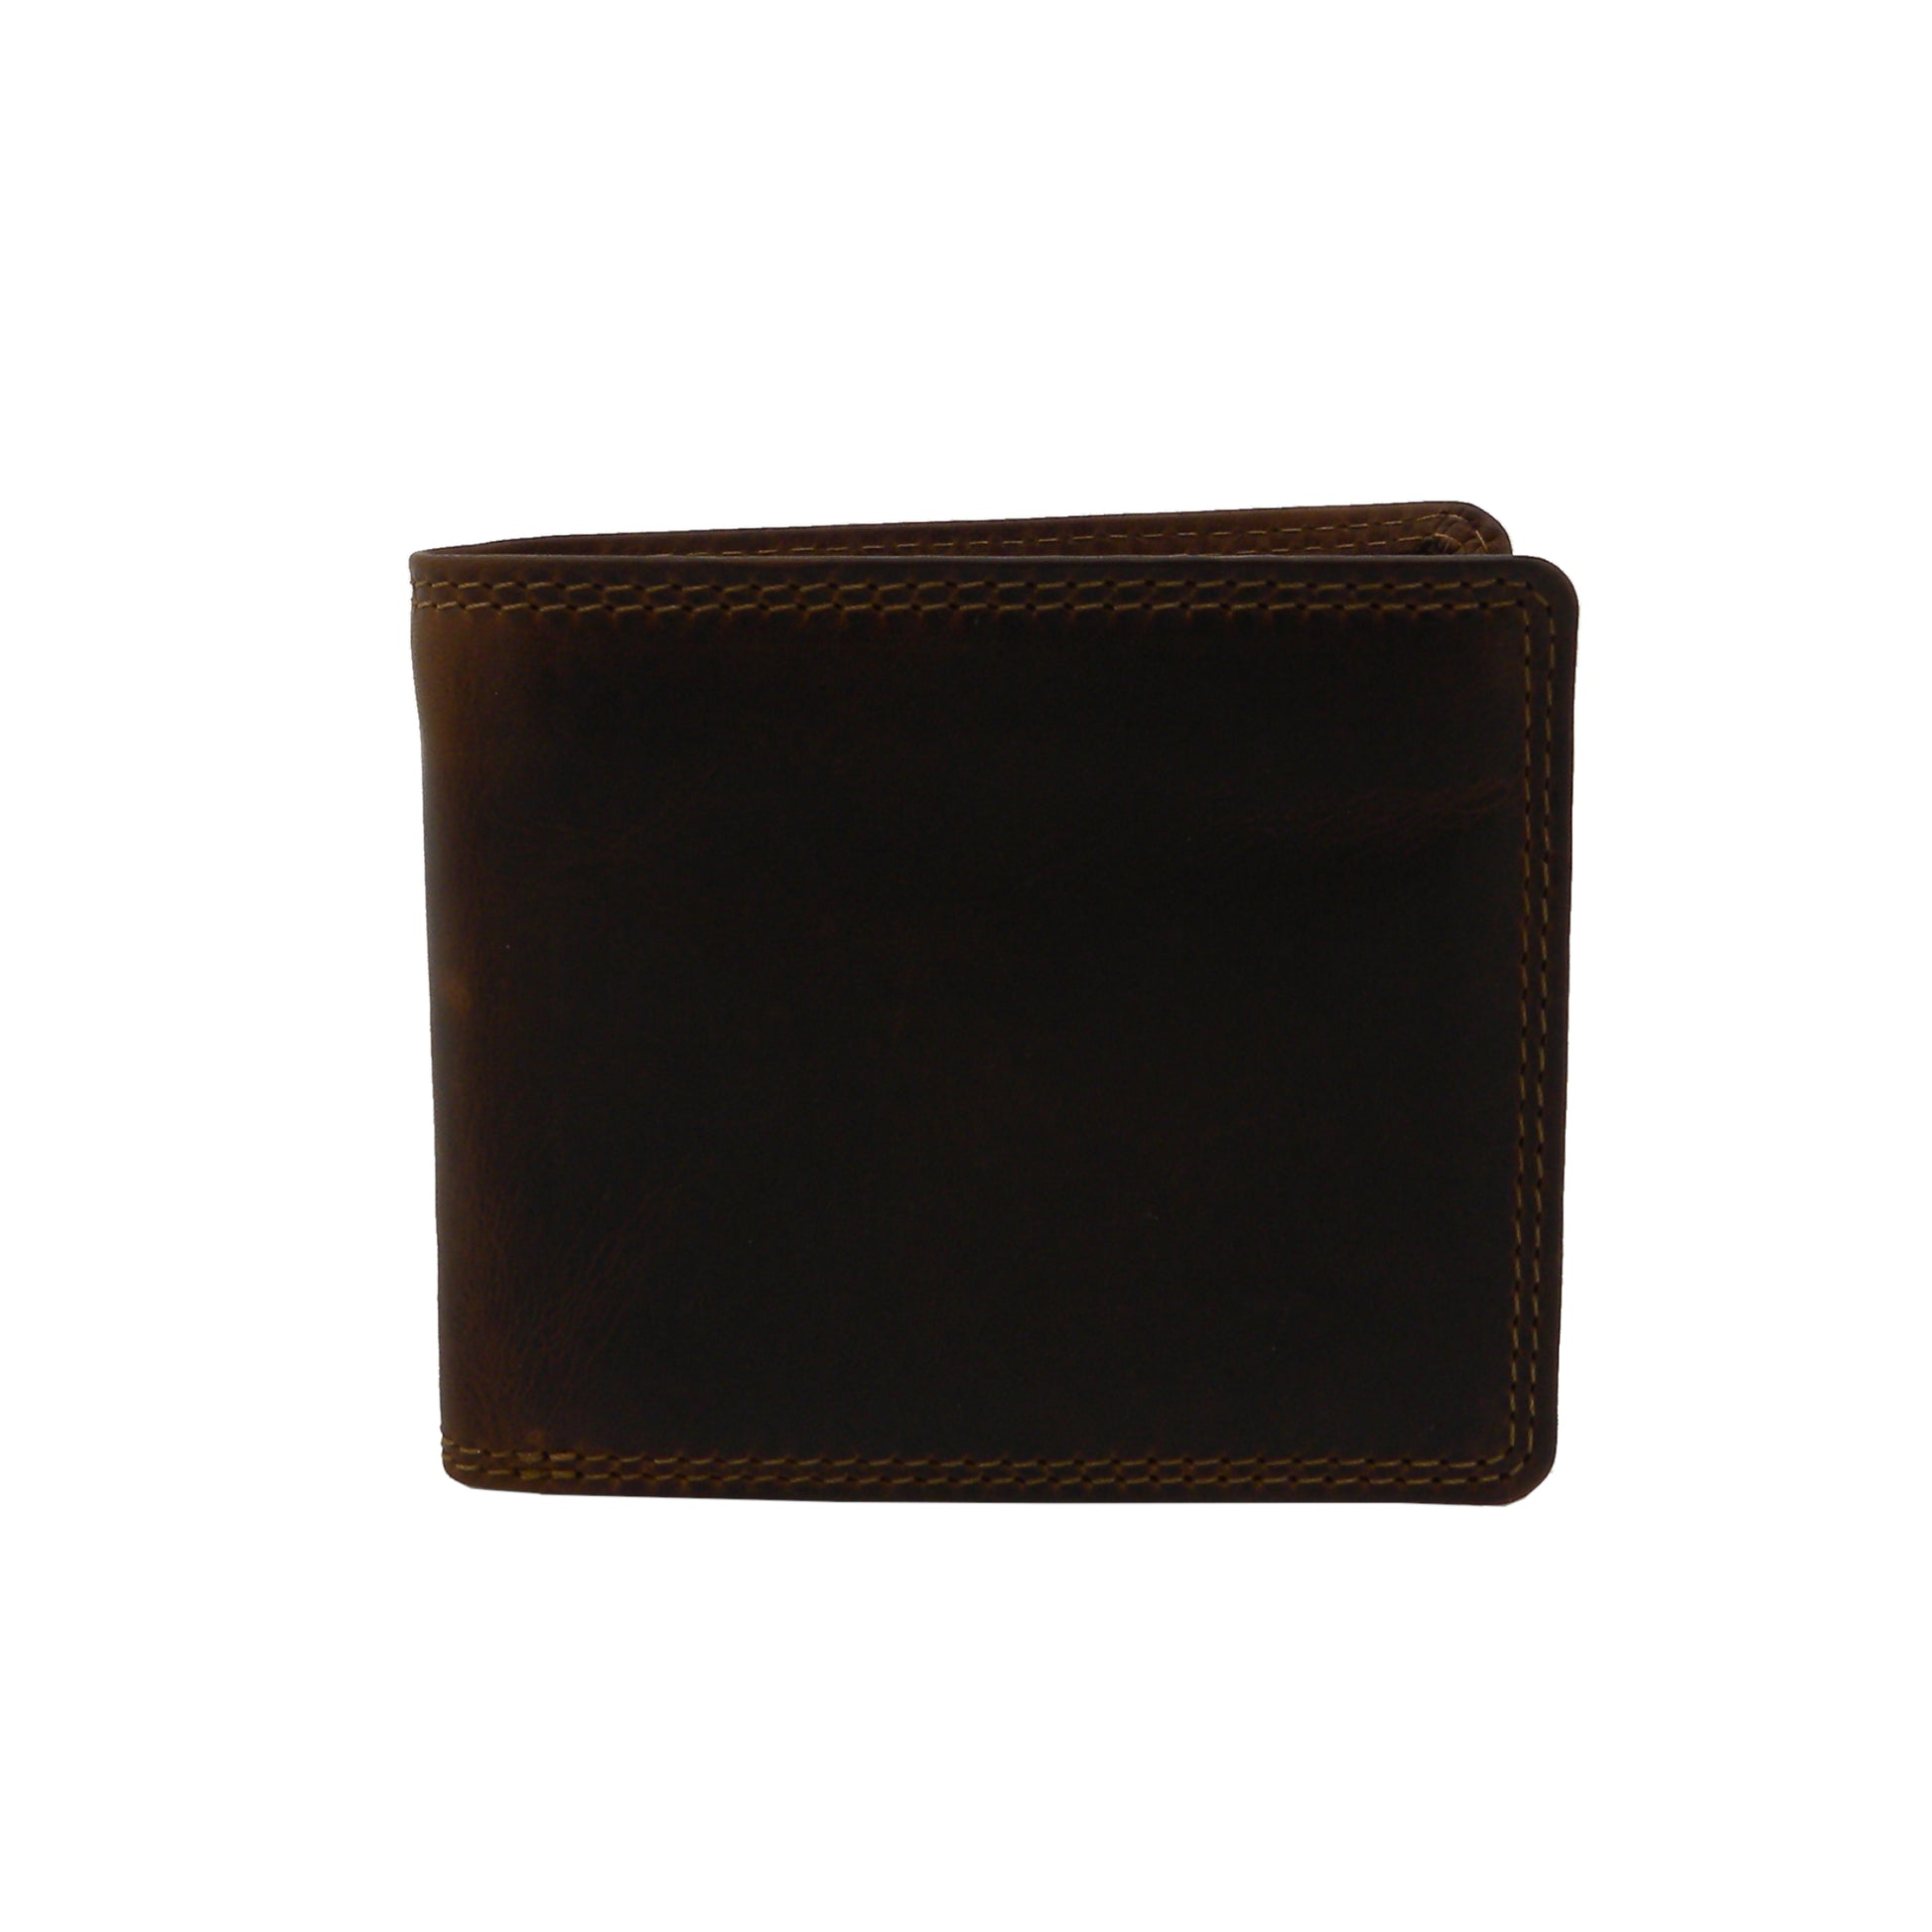 Re Leather Wallet Bifold With Top Mid Flap Egli S